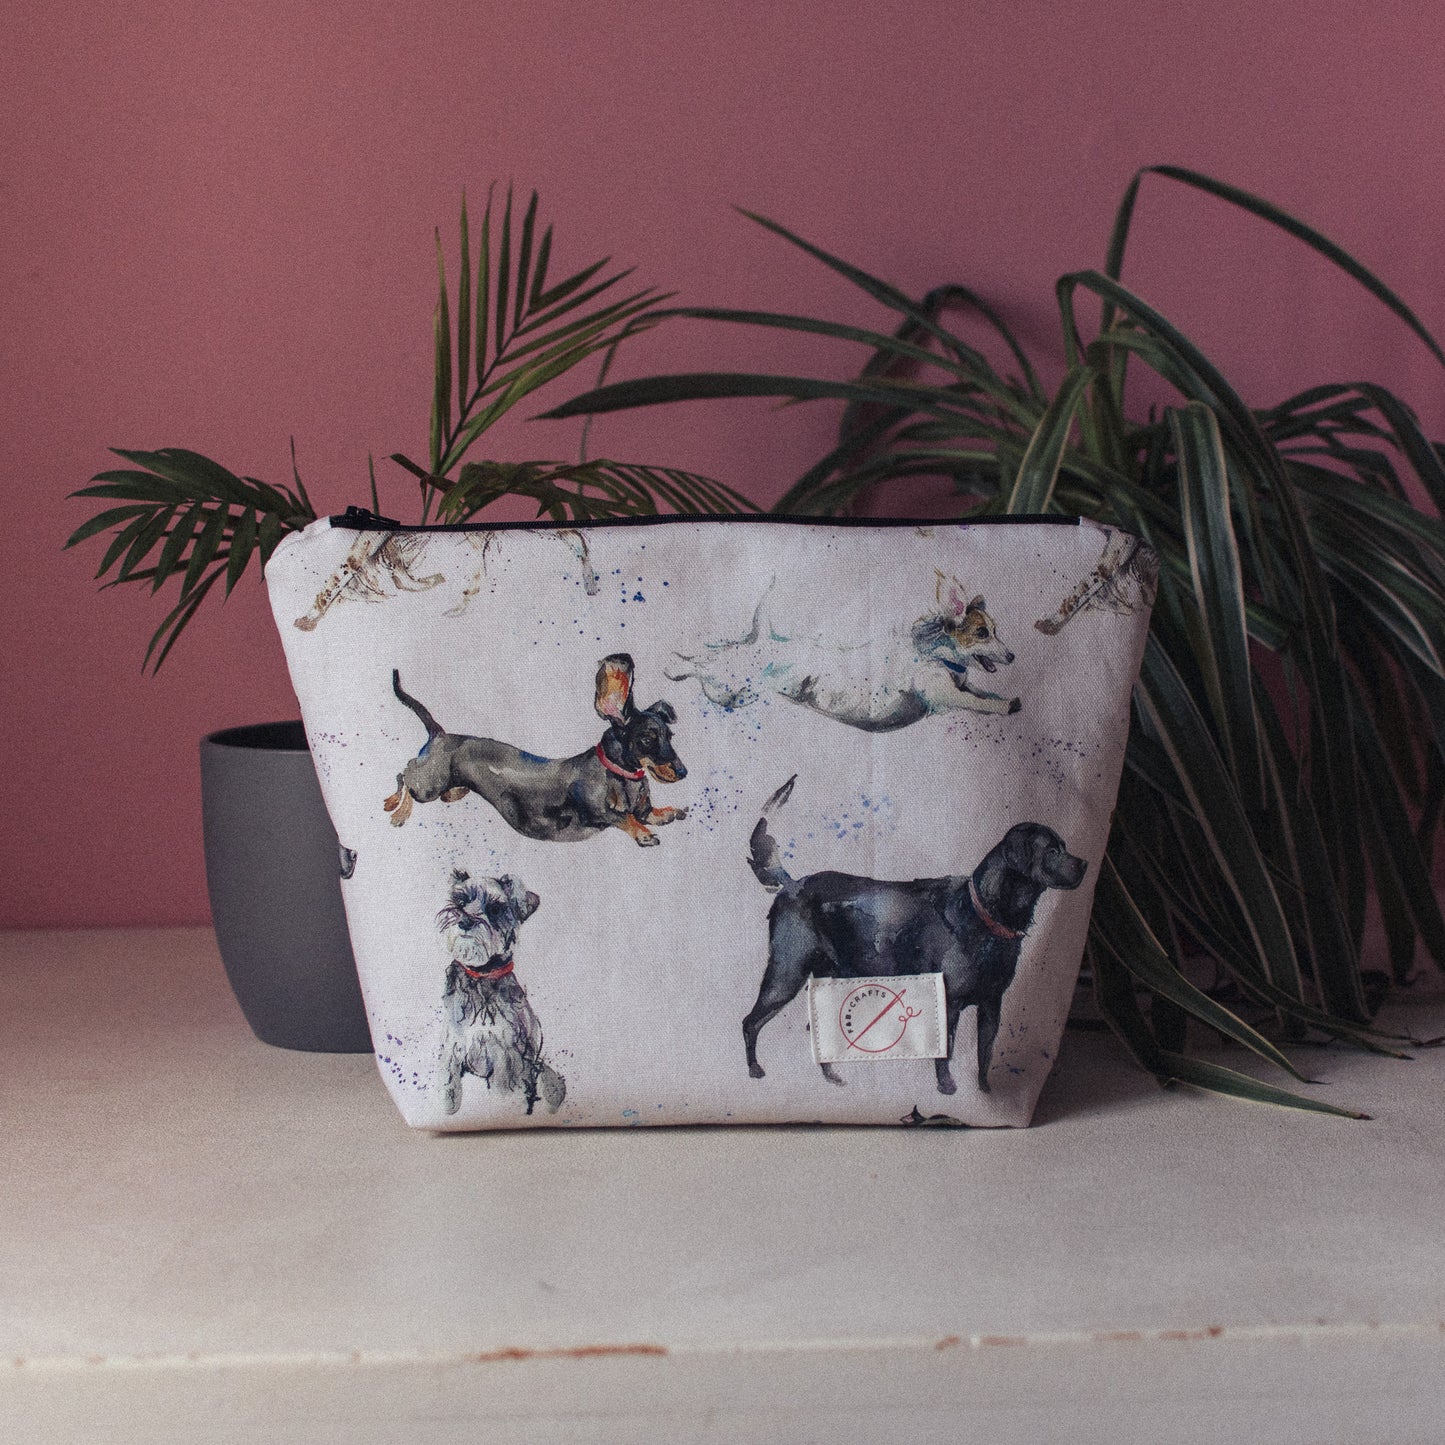 Dog Print Wash Bag featuring labradors, terriers, dachshunds and spaniels